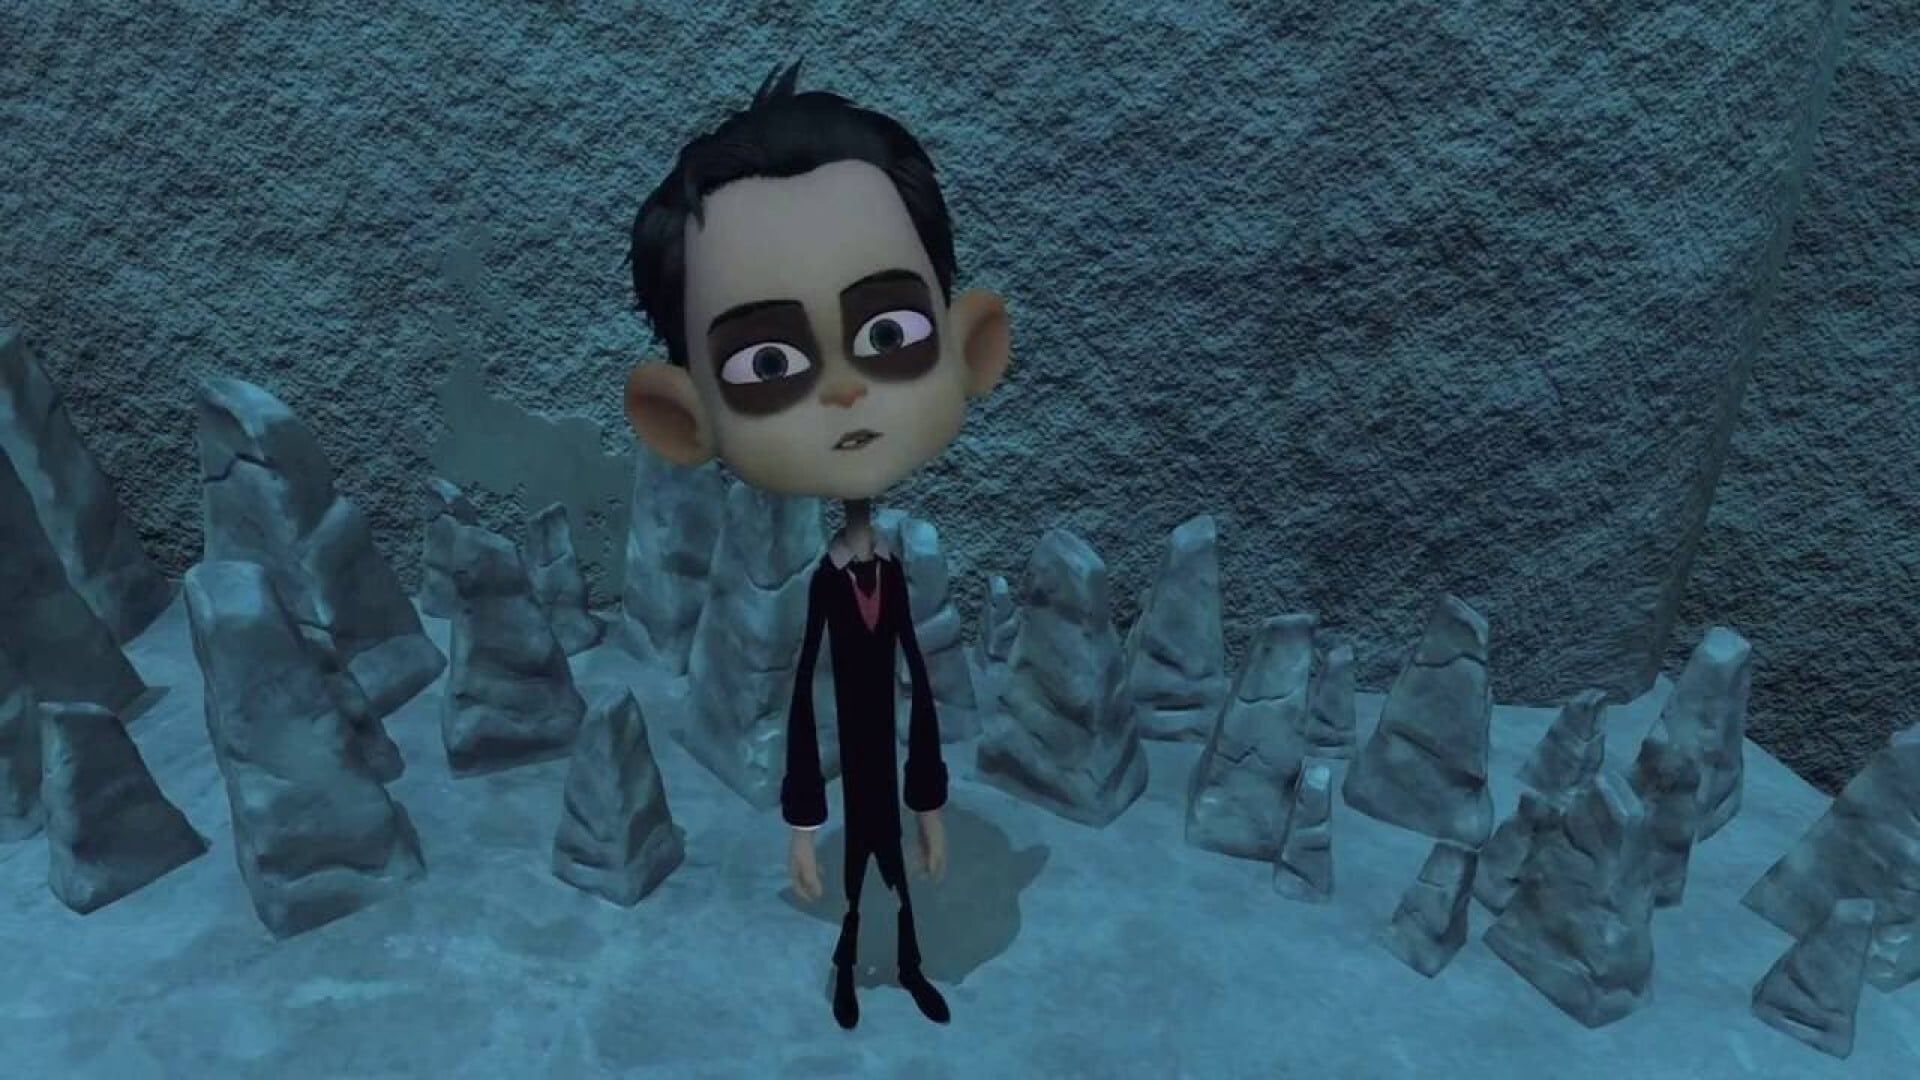 Howard Lovecraft and the Frozen Kingdom background